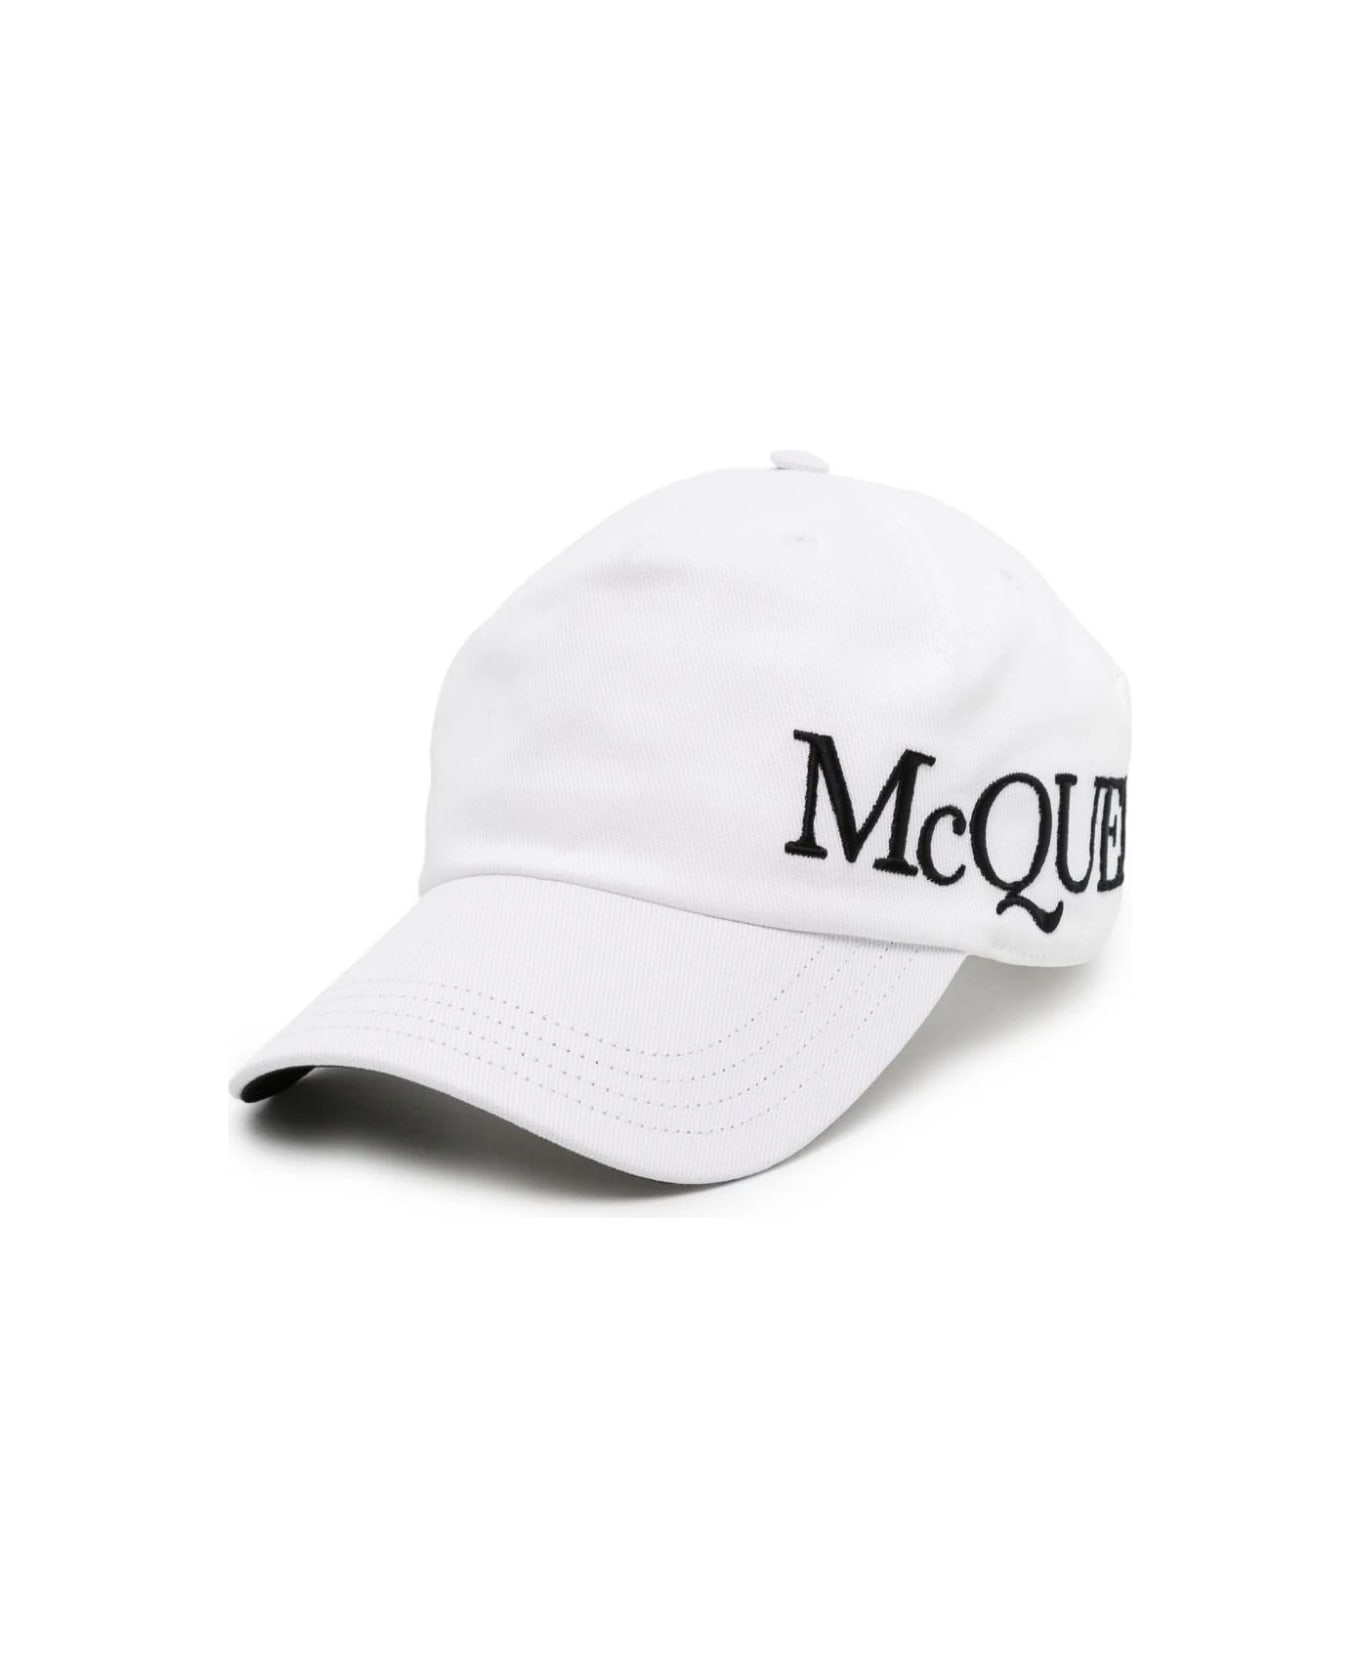 Alexander McQueen White Baseball Hat With Mcqueen Embroidery - White